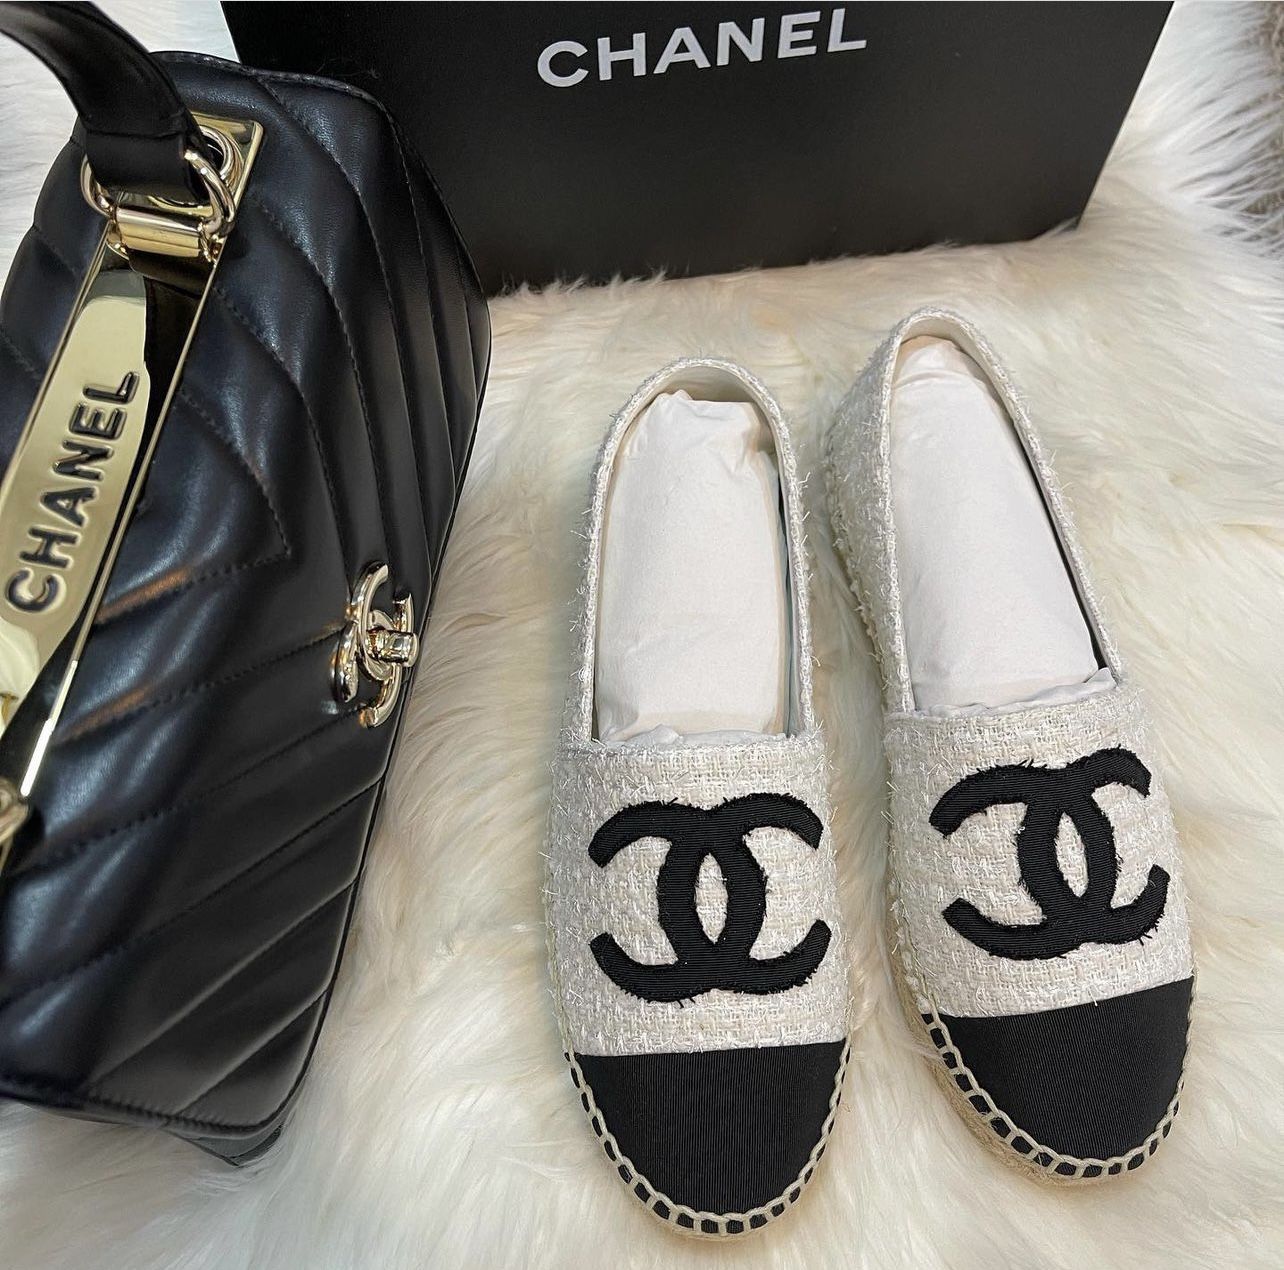 Chanel Women's Shoes On Sale Up To 90% Off Retail